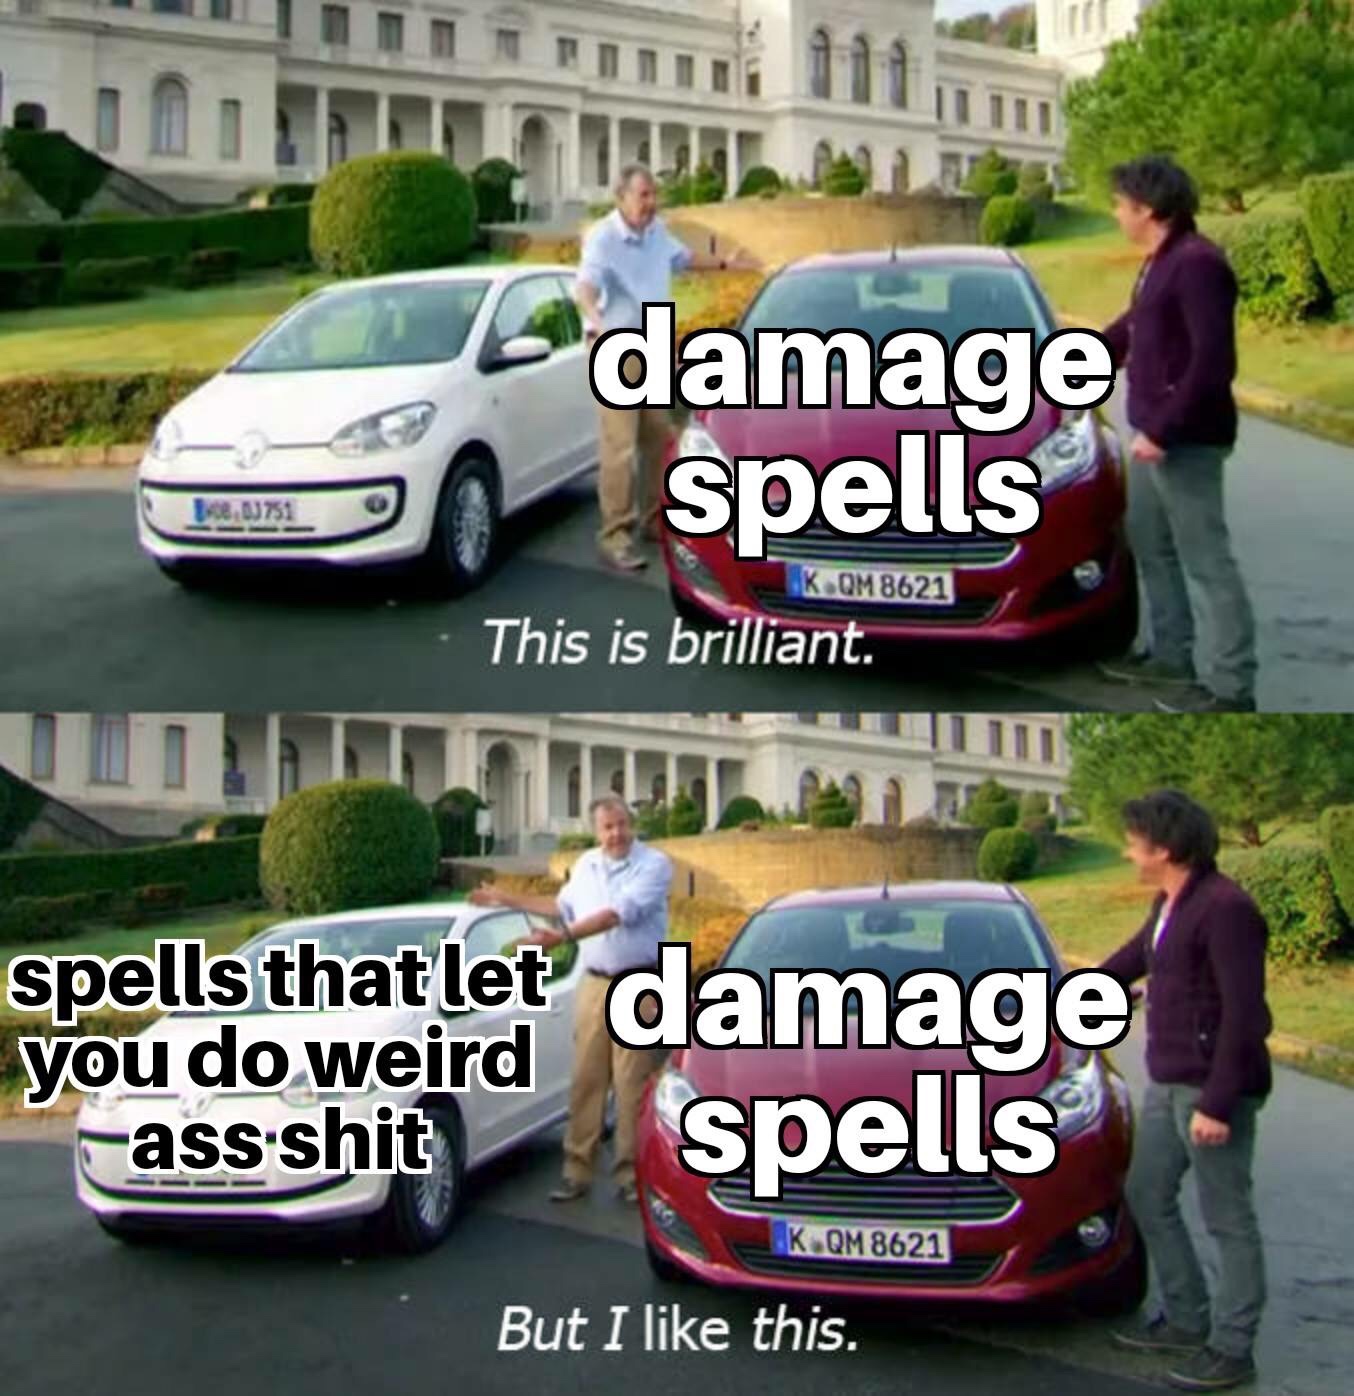 dungeons and dragons - livadia palace - A damage spells KOM8621 1. This is brilliant. spells that let damage you do weird ass shit spells K.Qm 8621 But I this.